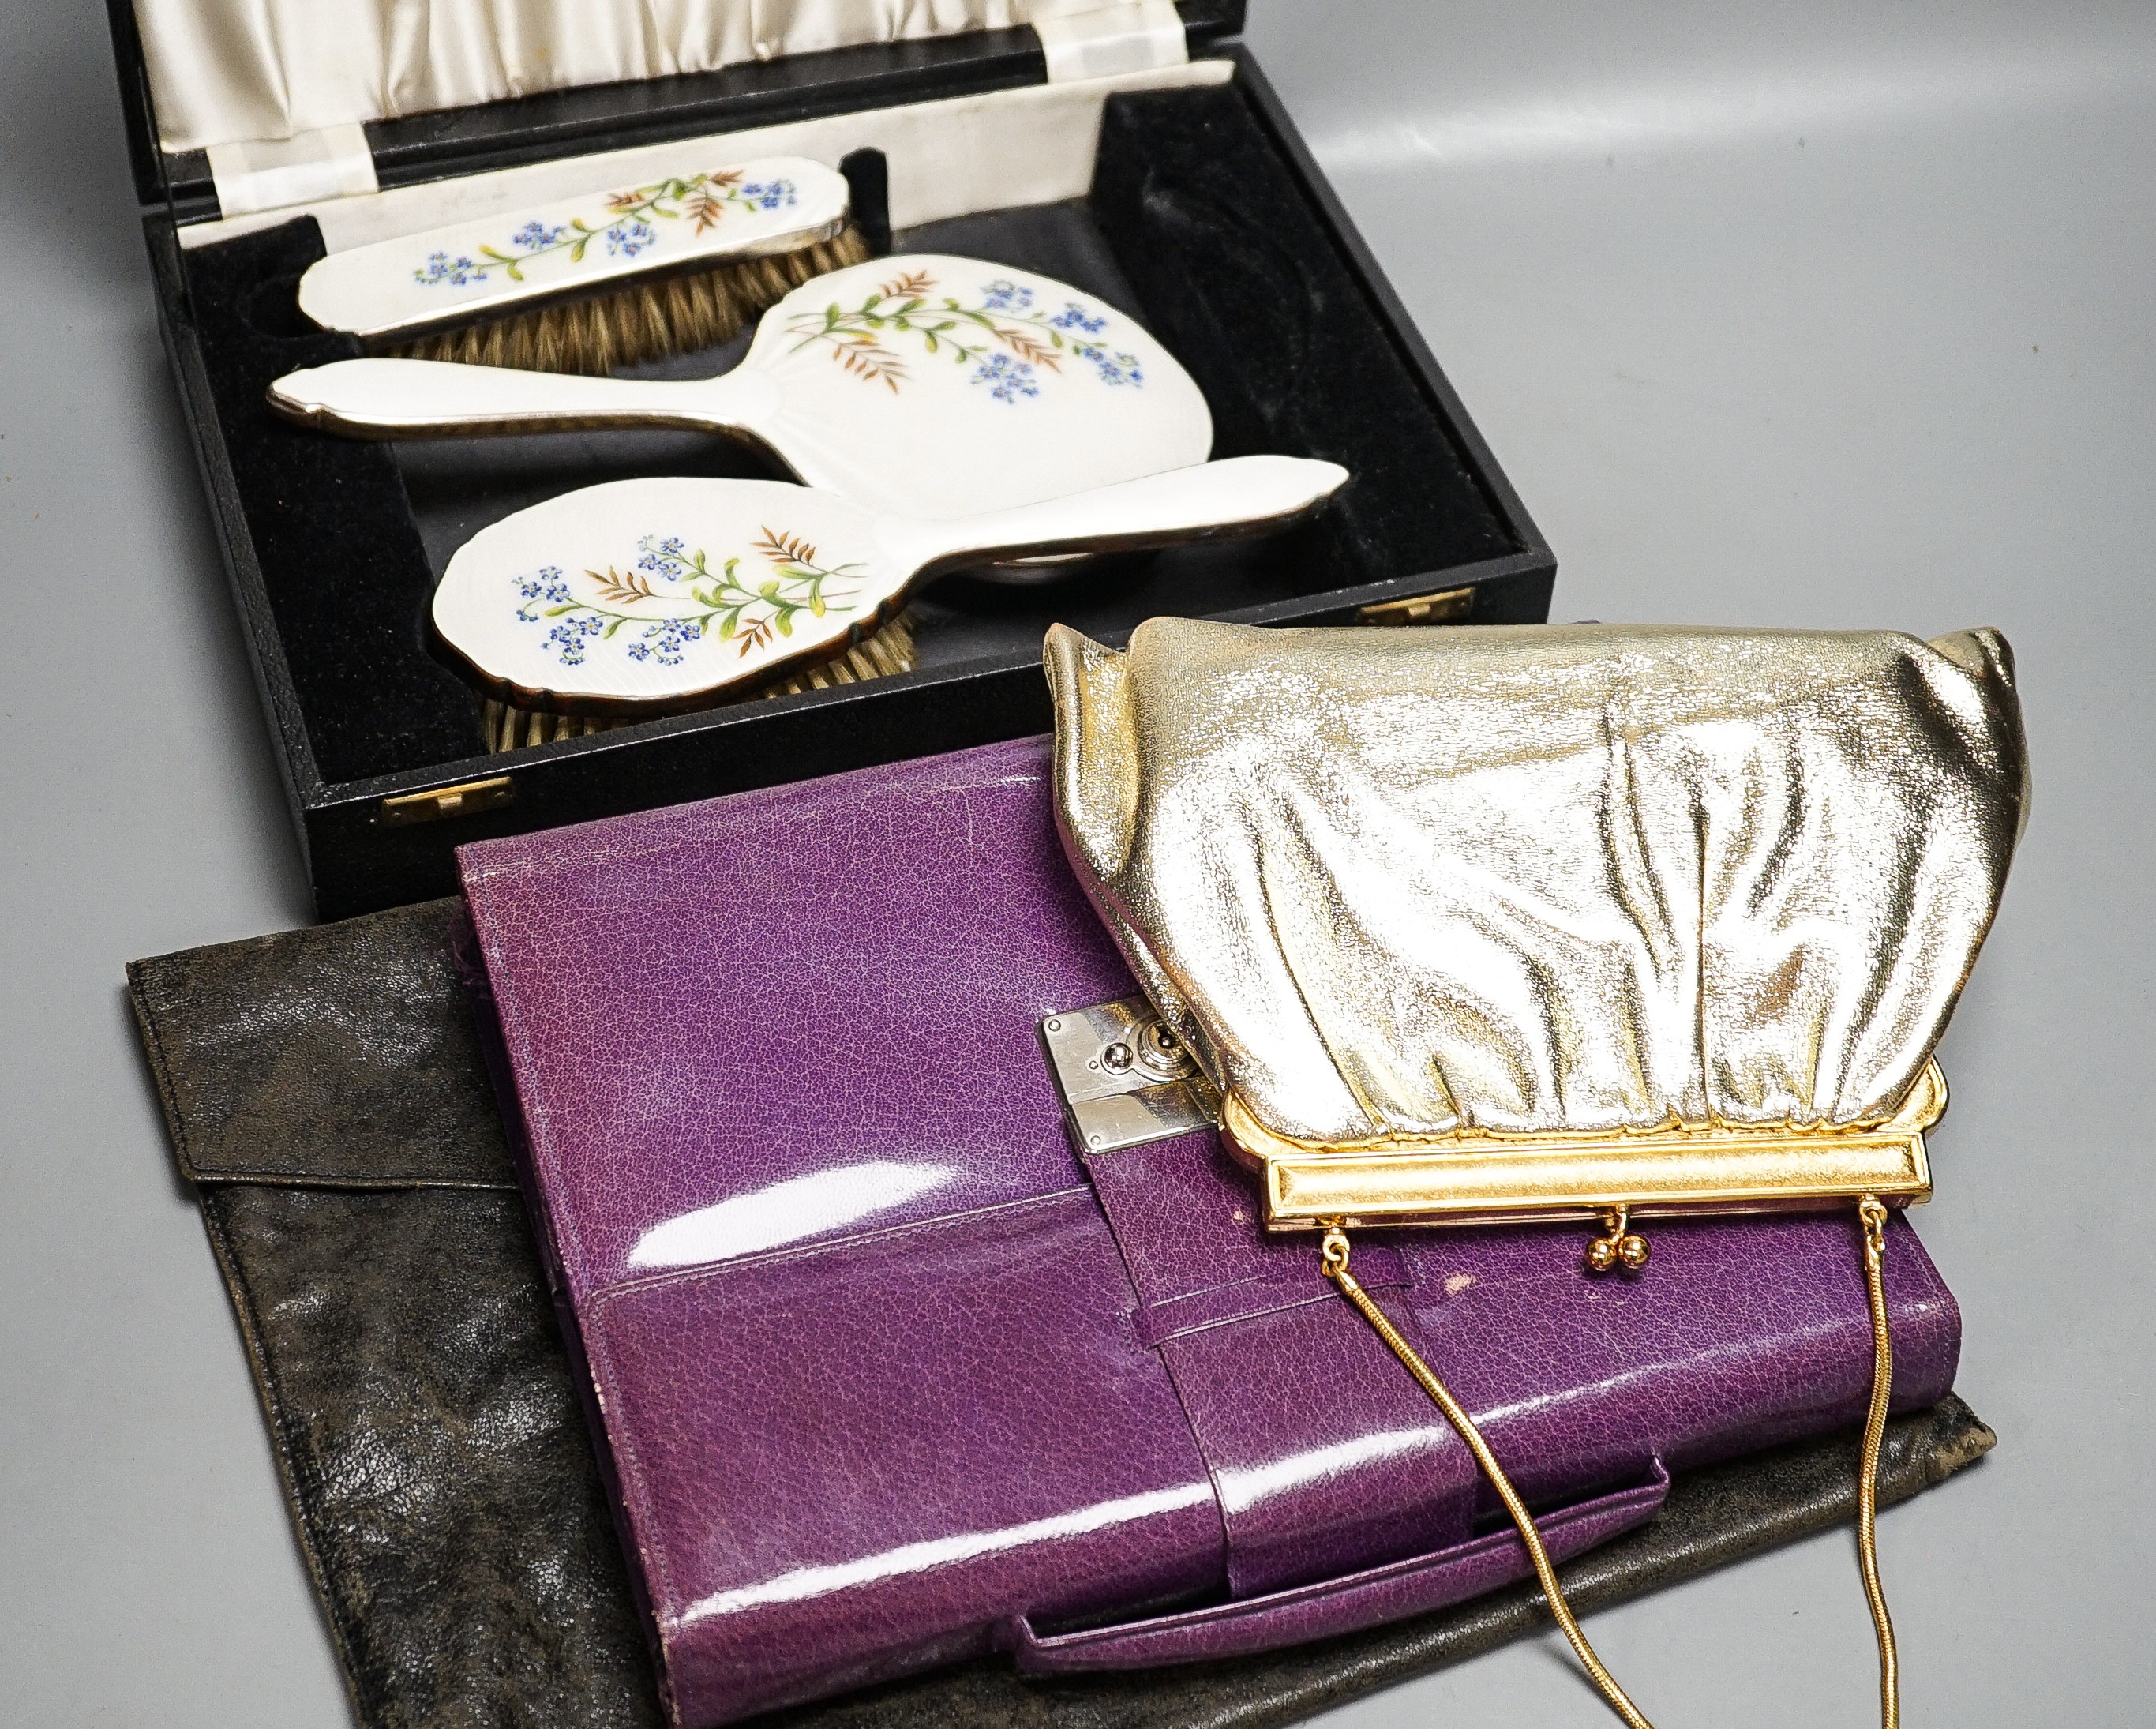 A boxed, three piece silver plated translucent enamelled dressing set, a purple leather stationary case and an evening bag